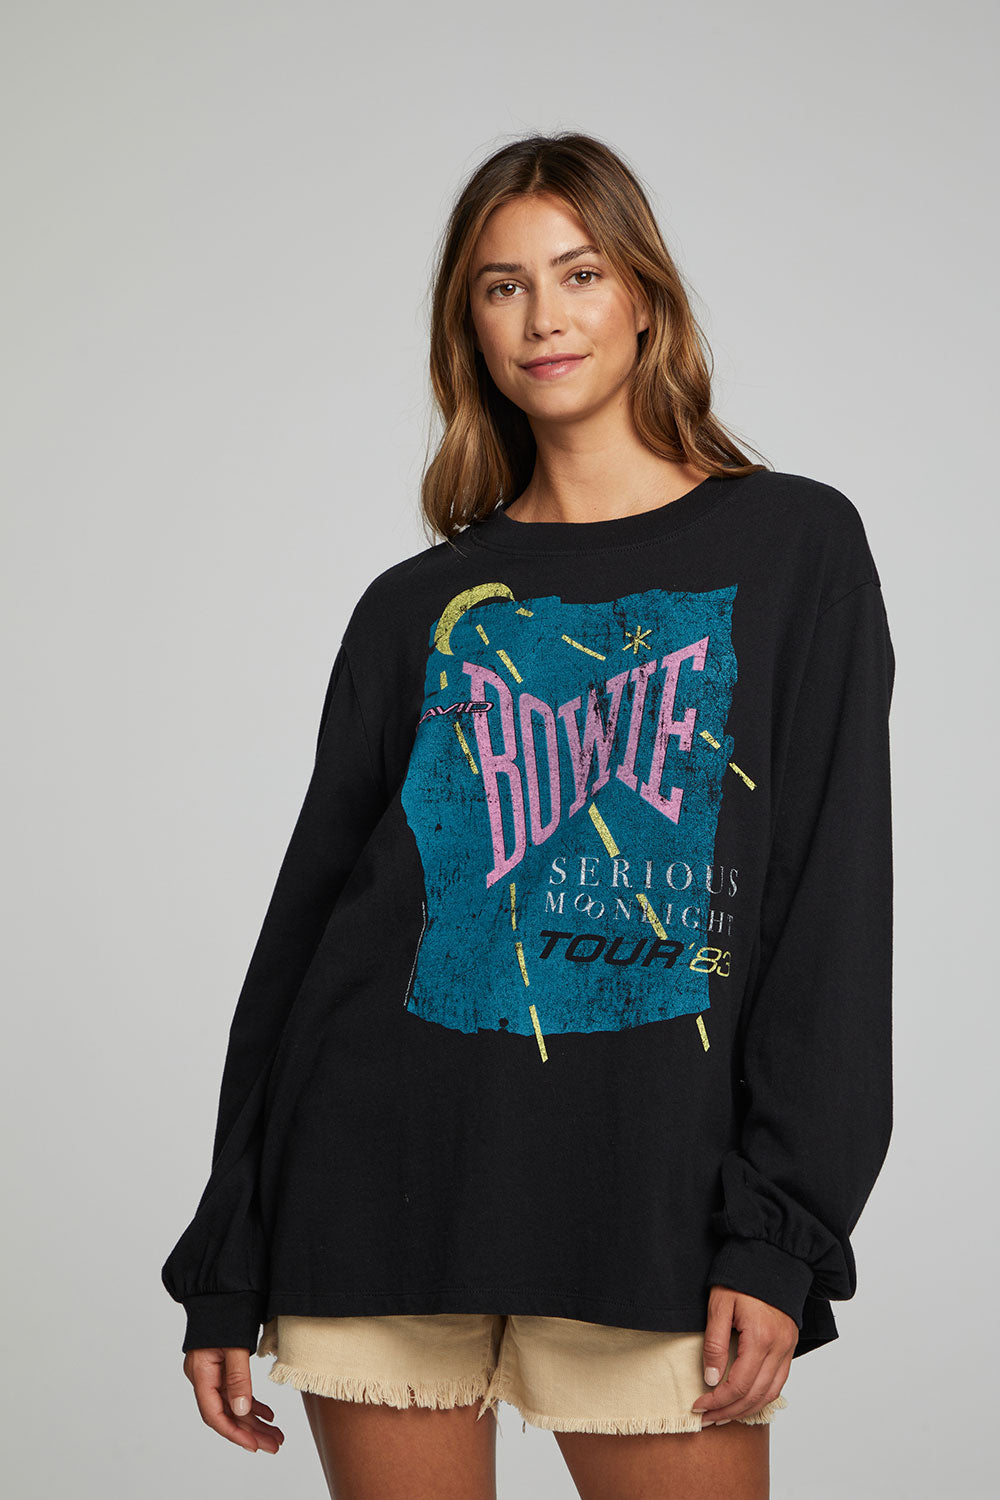 David Bowie - Serious Moonlight WOMENS chaserbrand